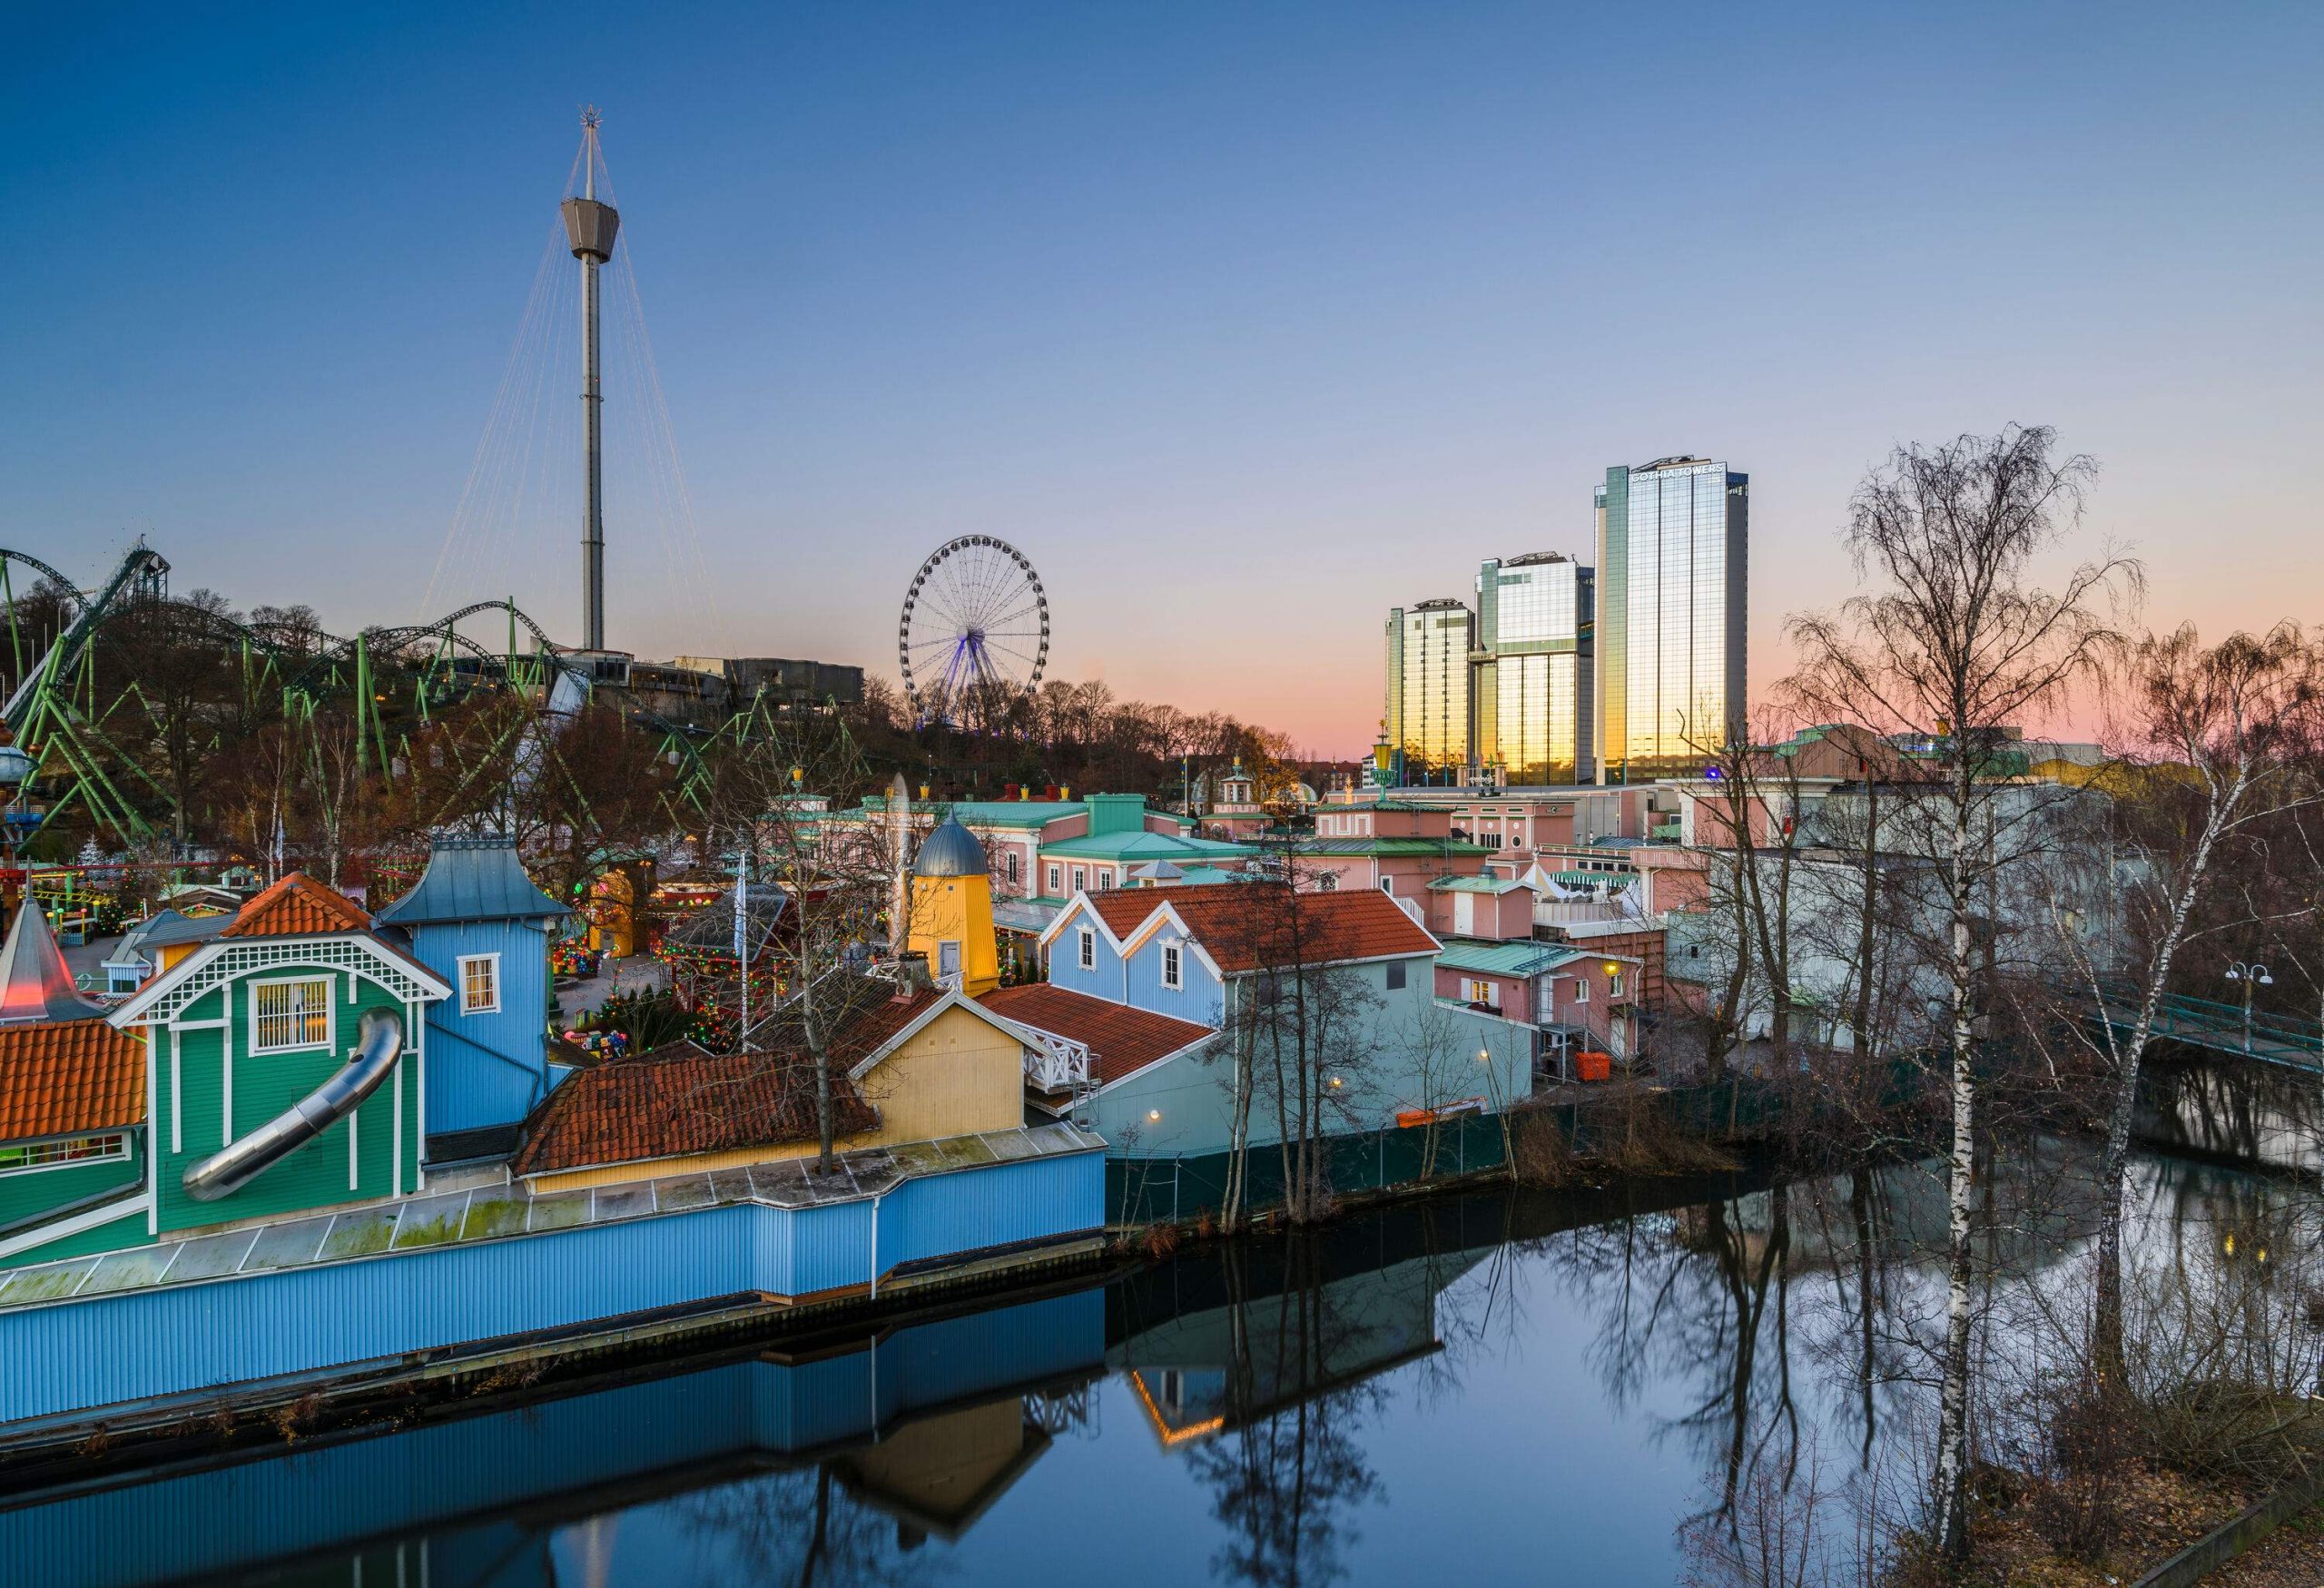 A pond along the colourful booths and structures of an amusement park with views of roller coaster rides, a Ferris wheel, drop towers, and three skyscrapers.